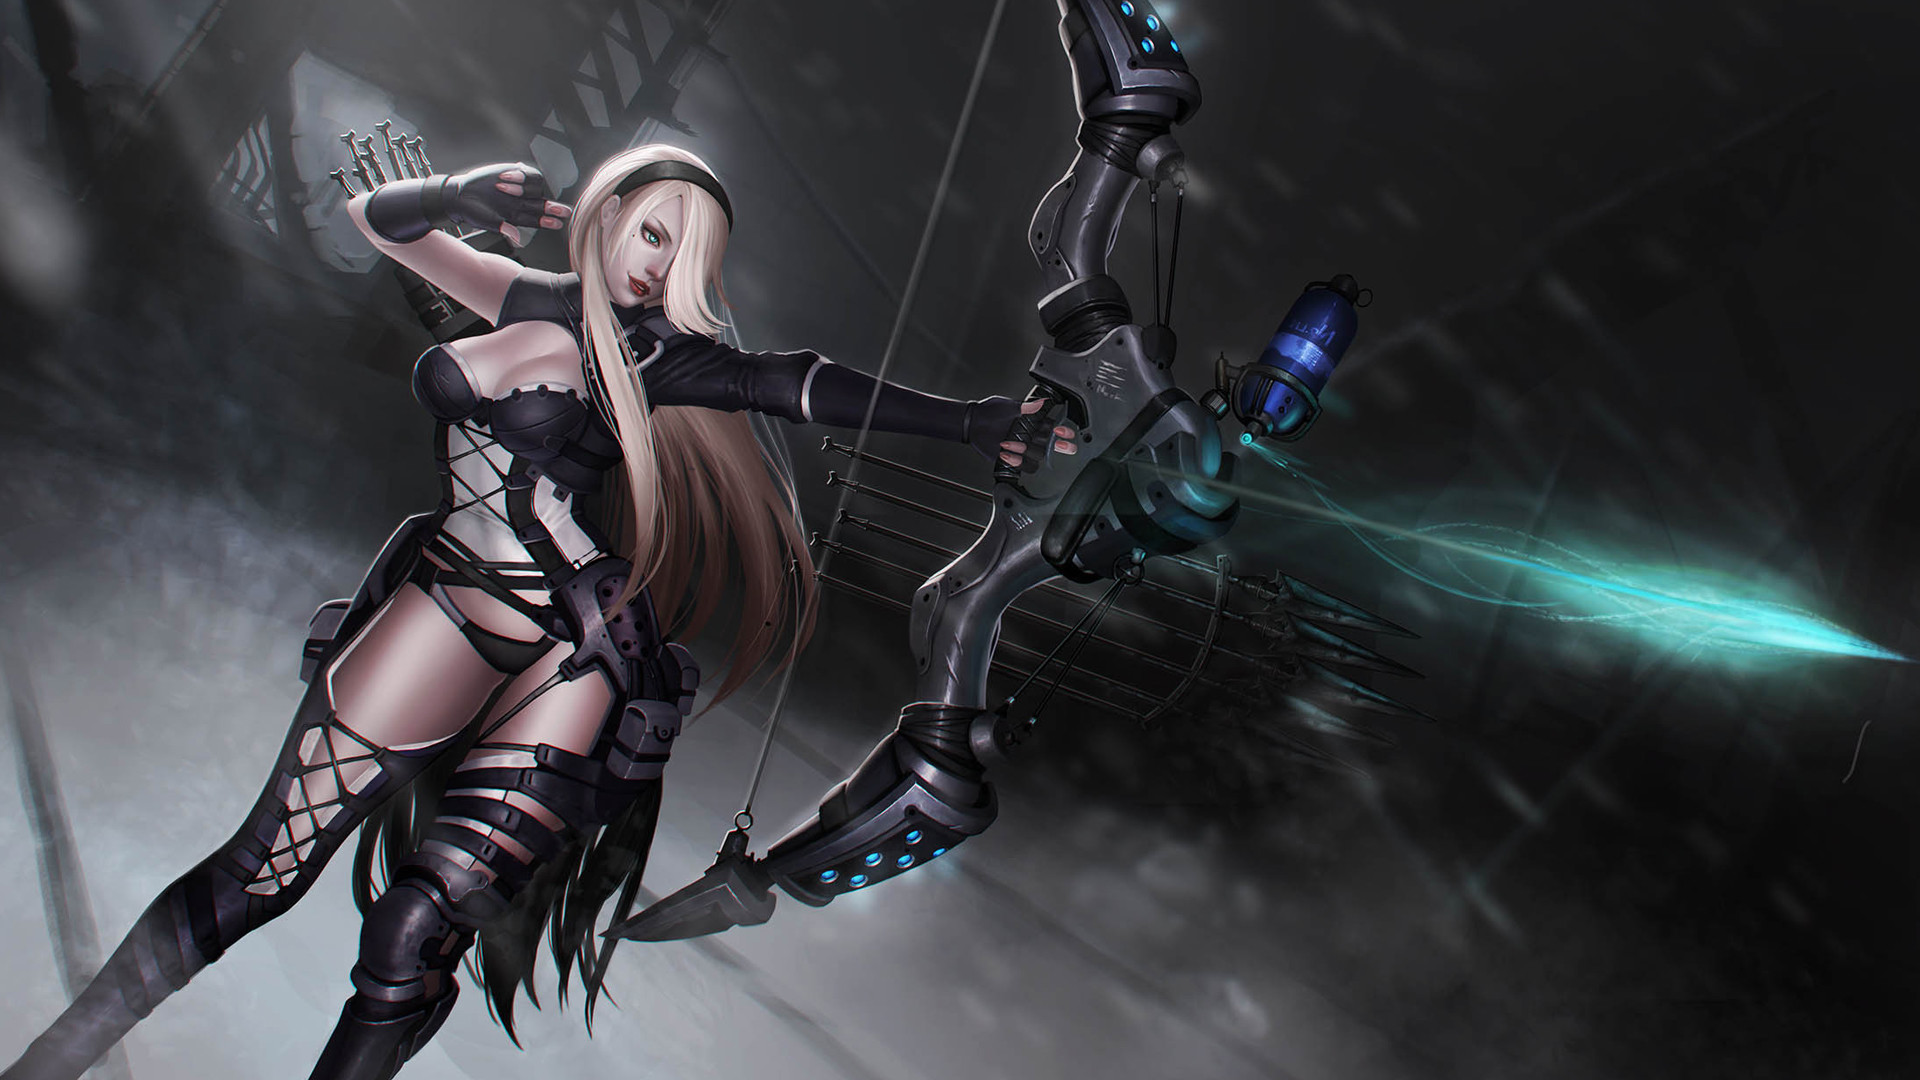 ashe lol wallpaper,action adventure game,cg artwork,fictional character,games,adventure game